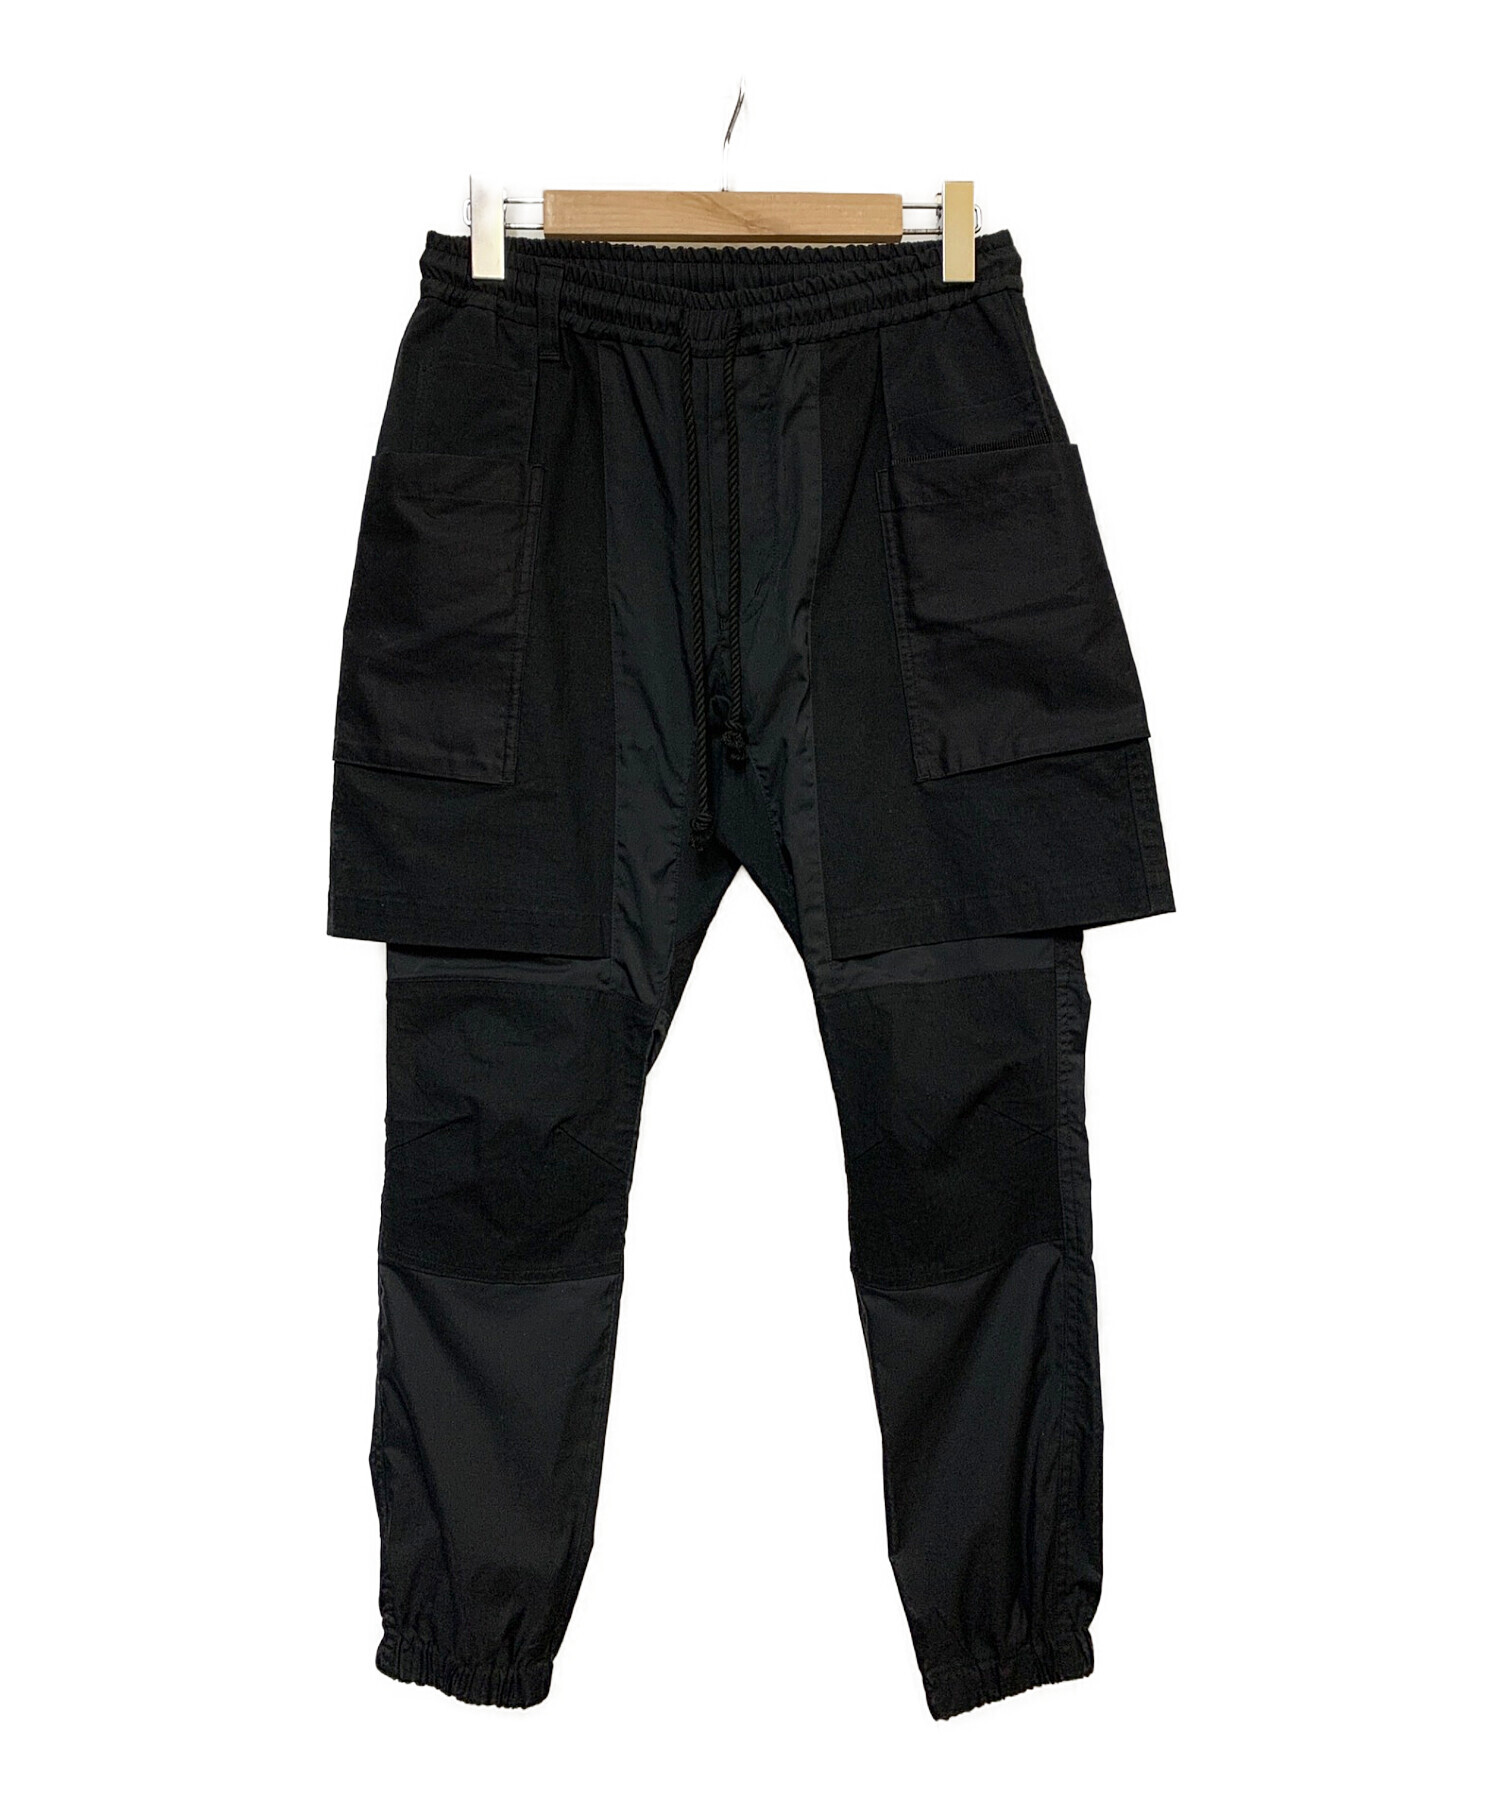 White Mountaineering Stretch Layered